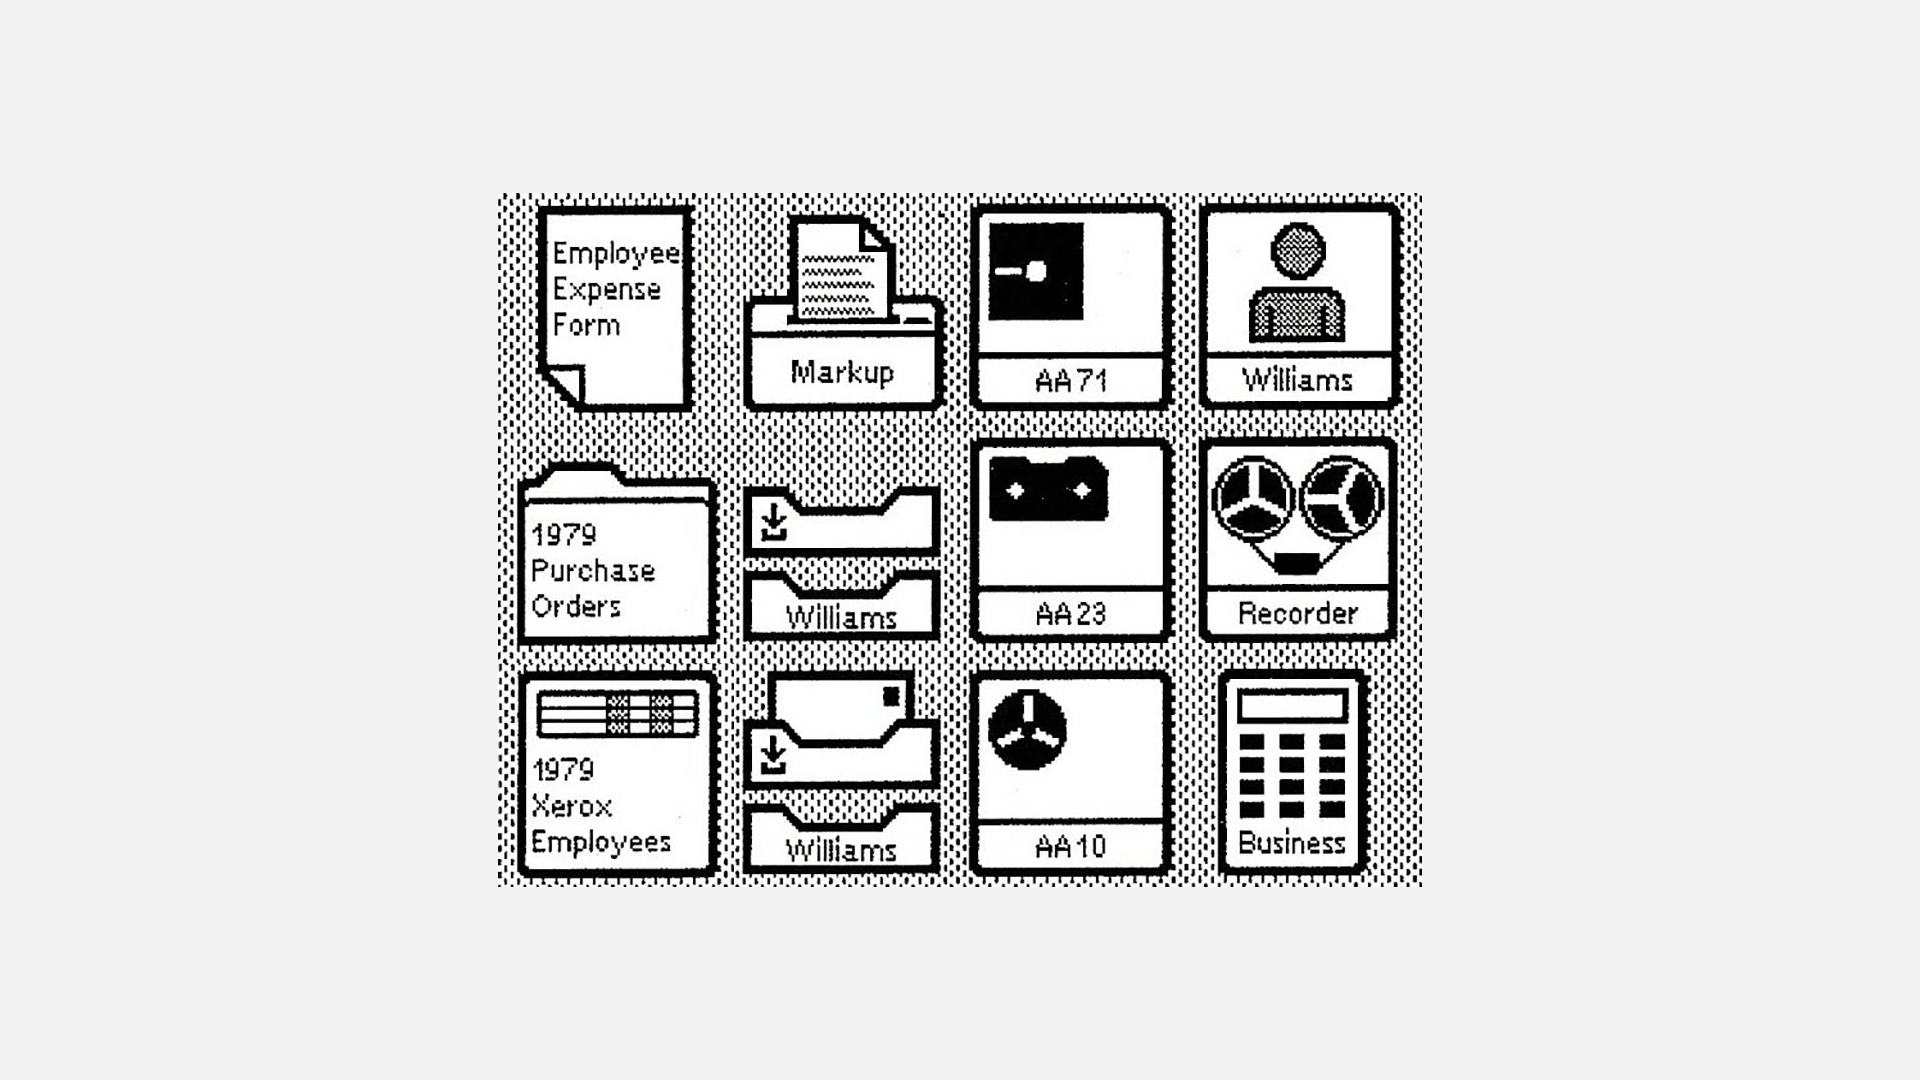 Redefining interfaces: The icon evolution